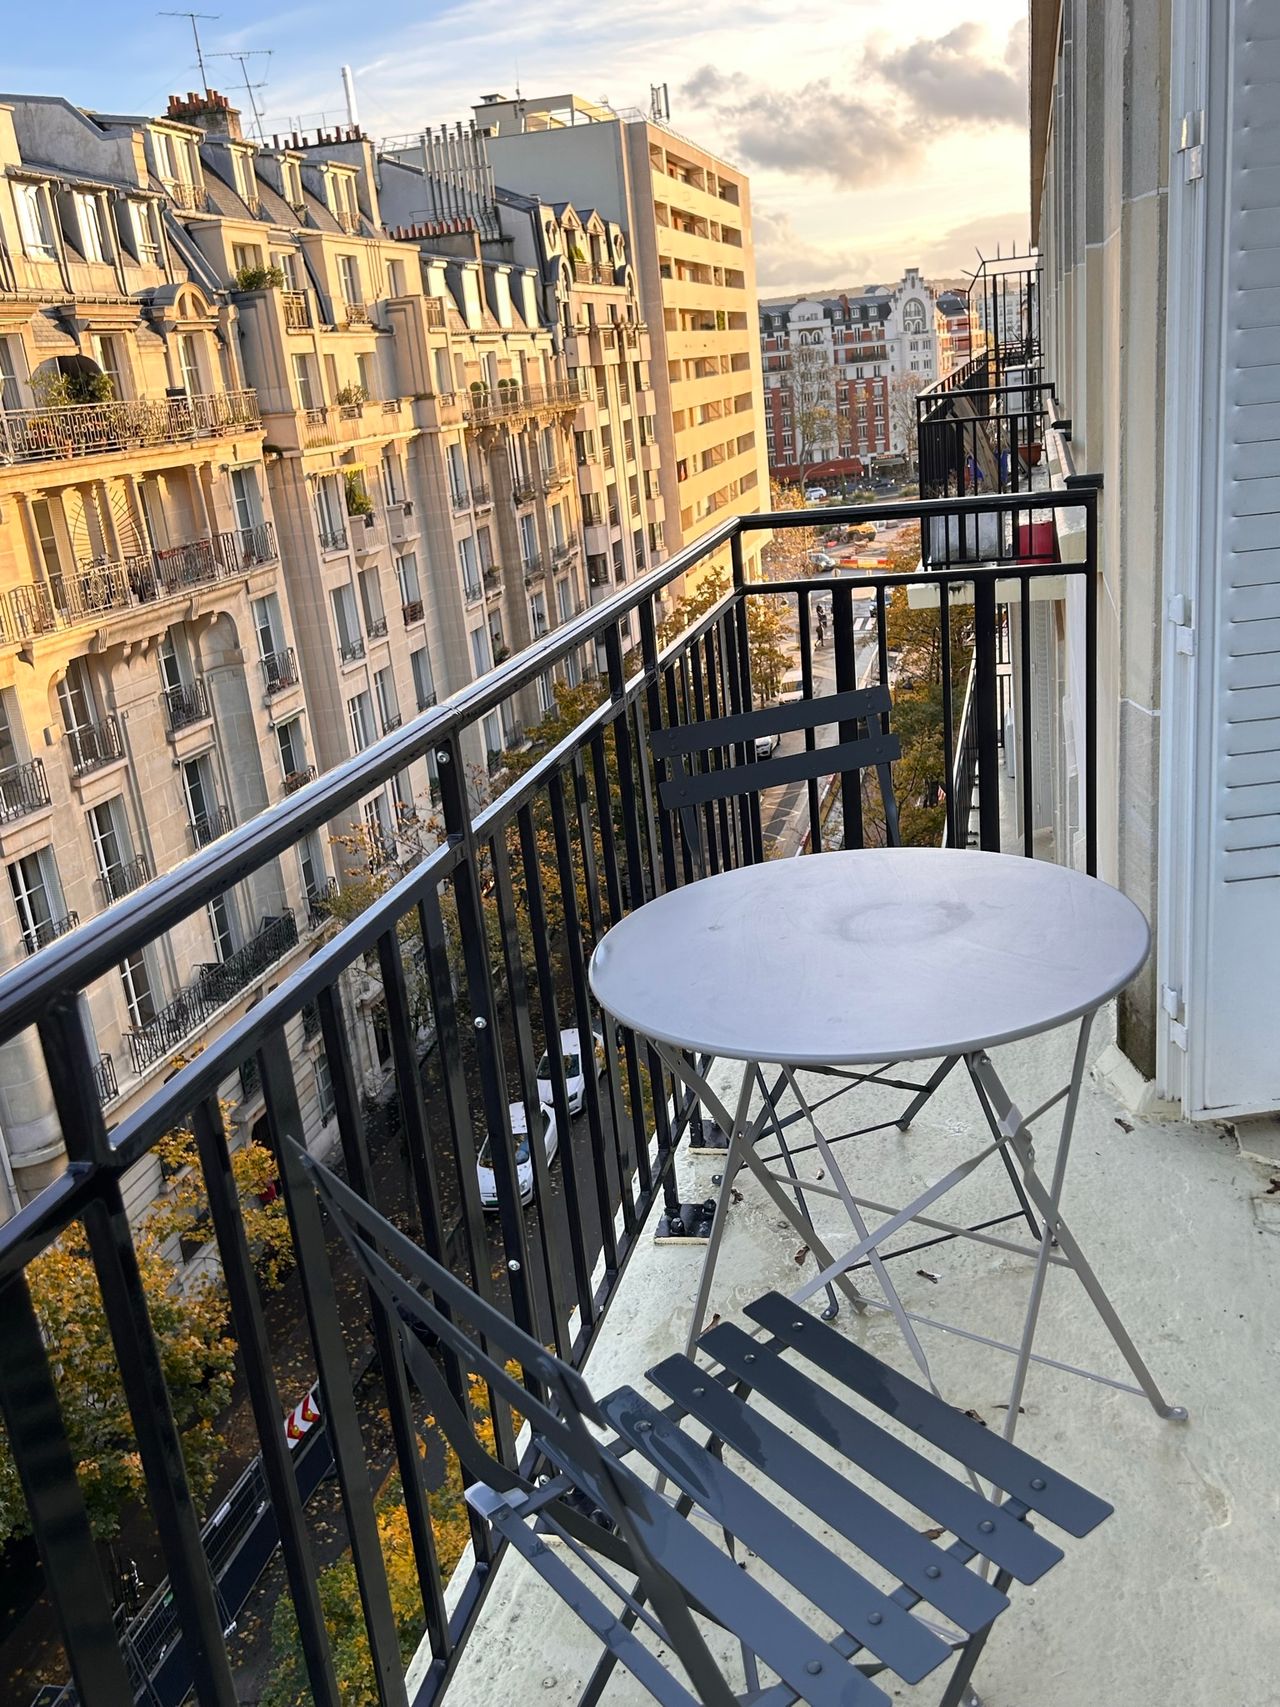 Cozy 2BR apt in Paris-16th near shops restaurants & transport, newly renovated.  Sleeps up to 5.